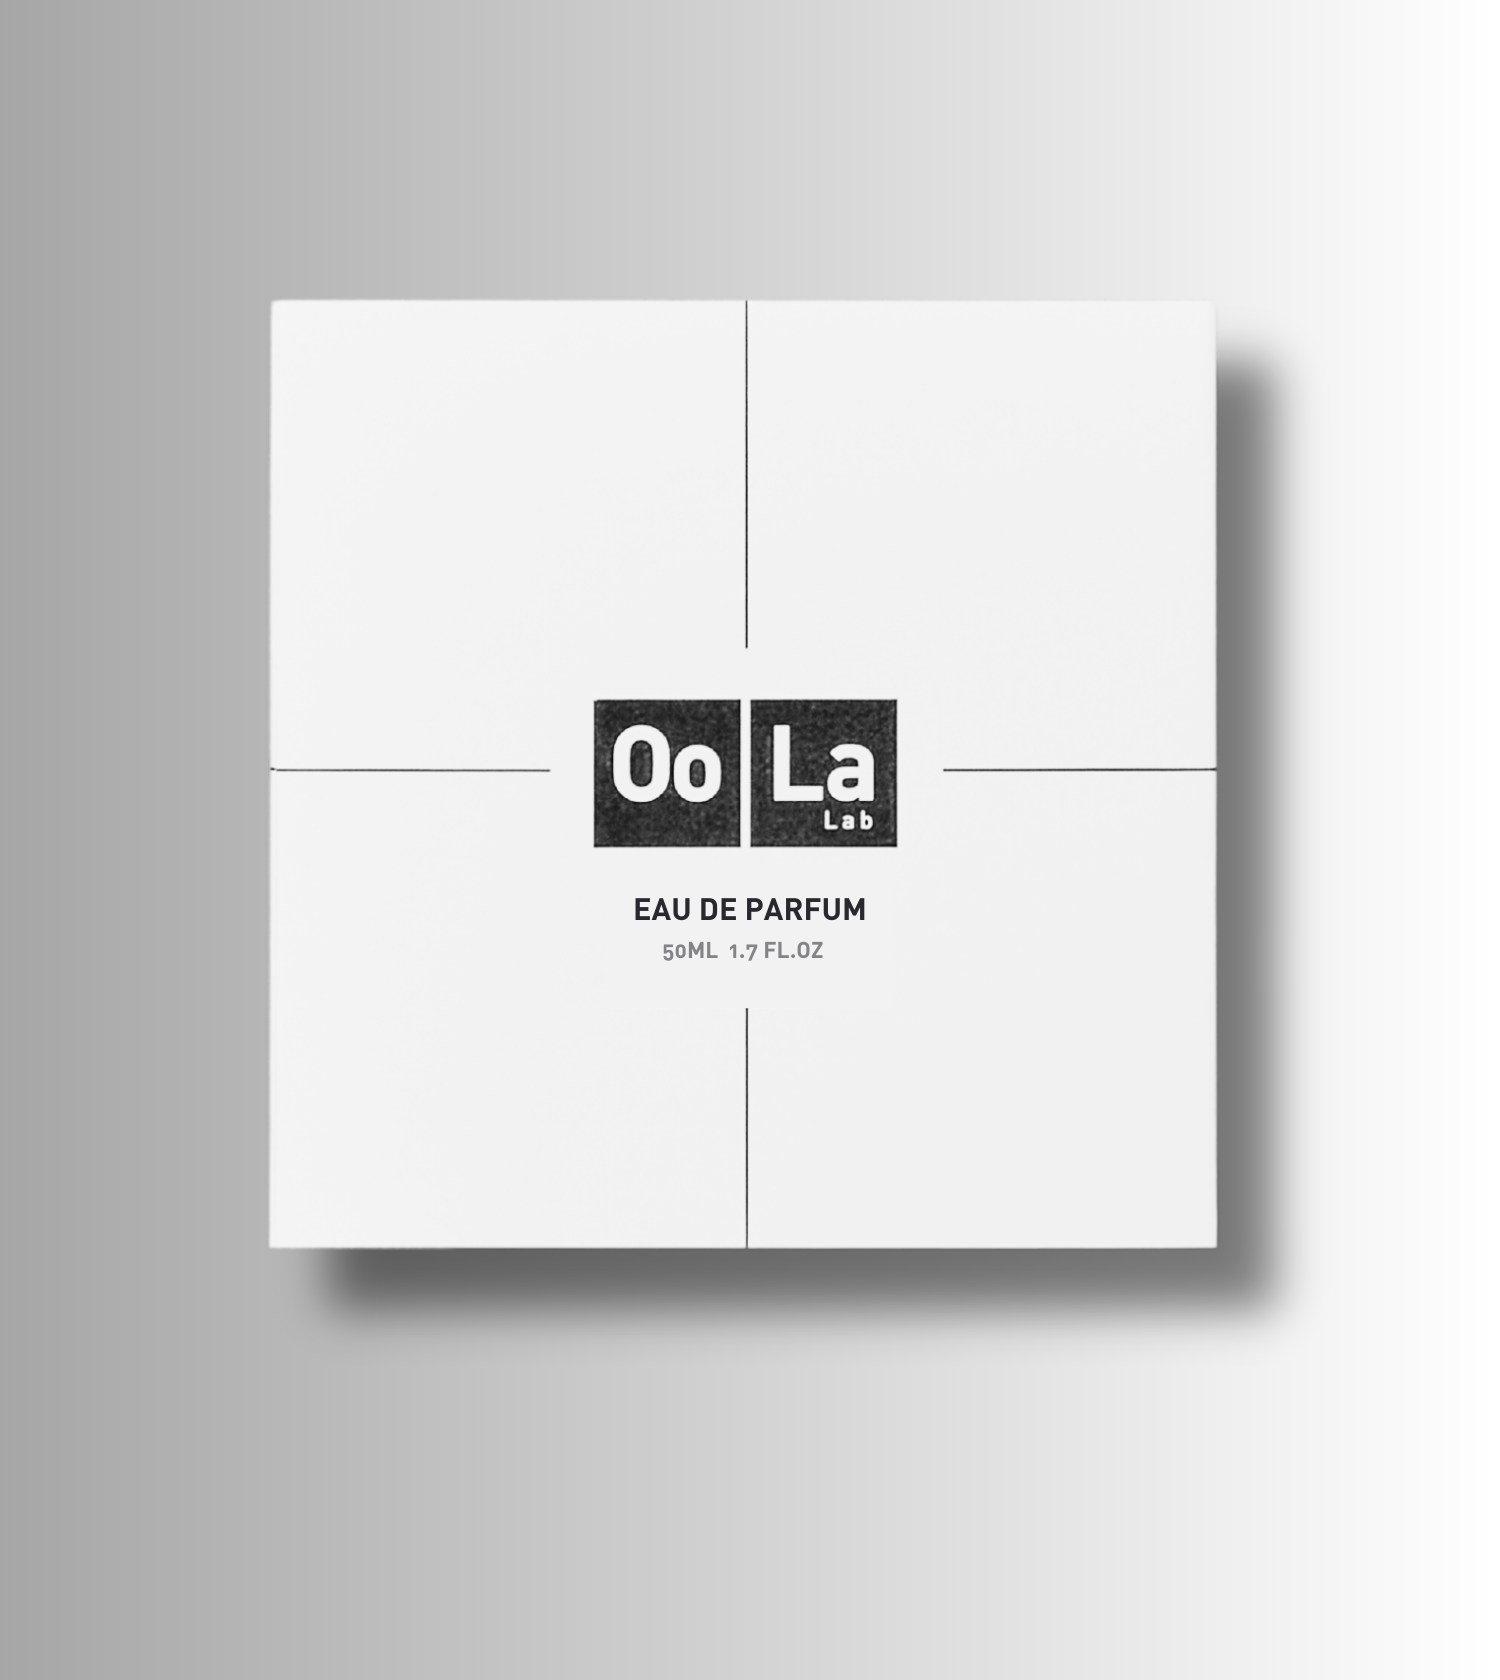 OoLa-Lab-eau-de-parfum-box_2e303c36-0d2c-41be-af90-3f5e3cc84749.png